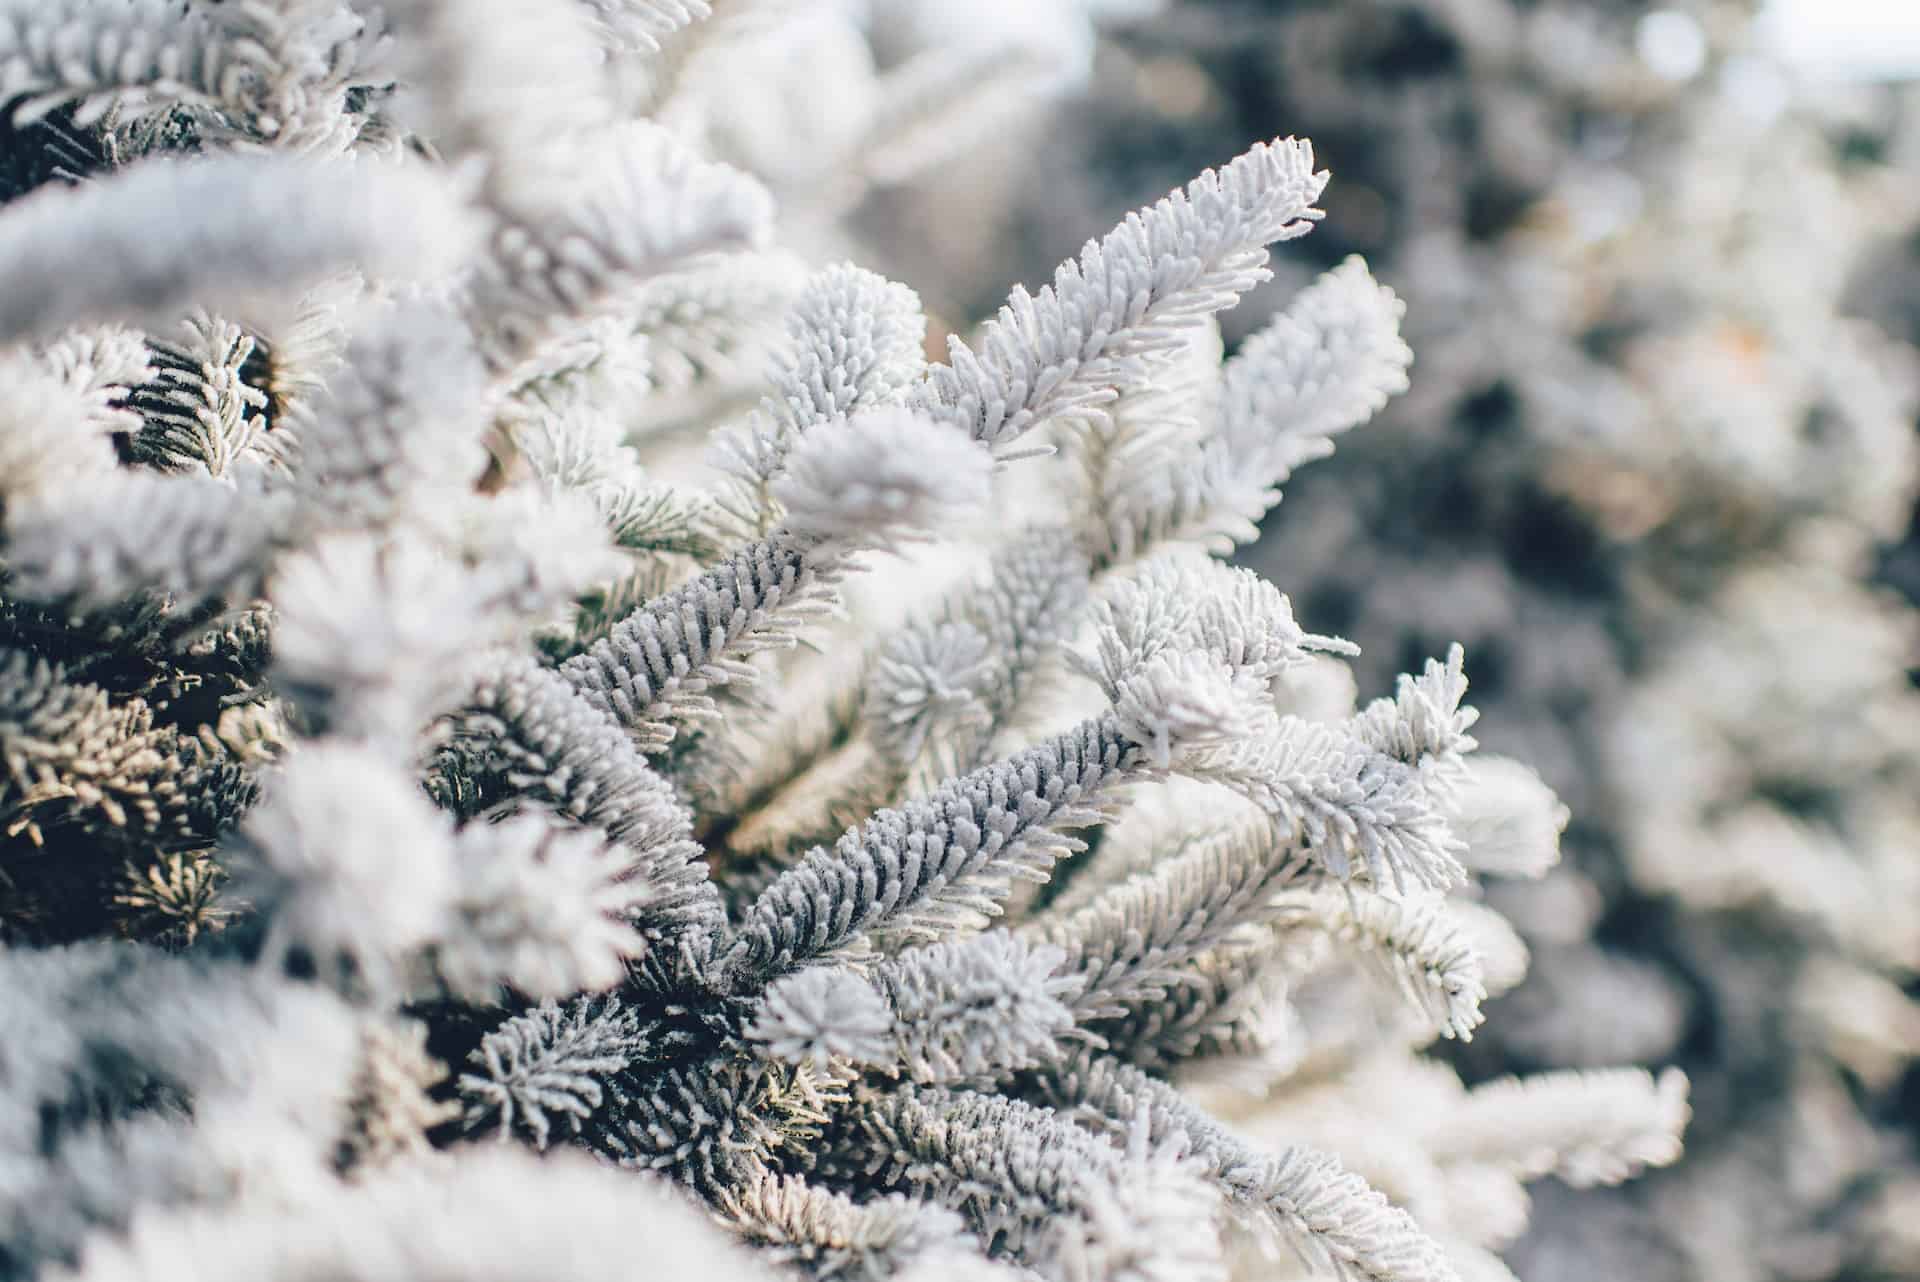 Should trees and shrubs be protected from winter?